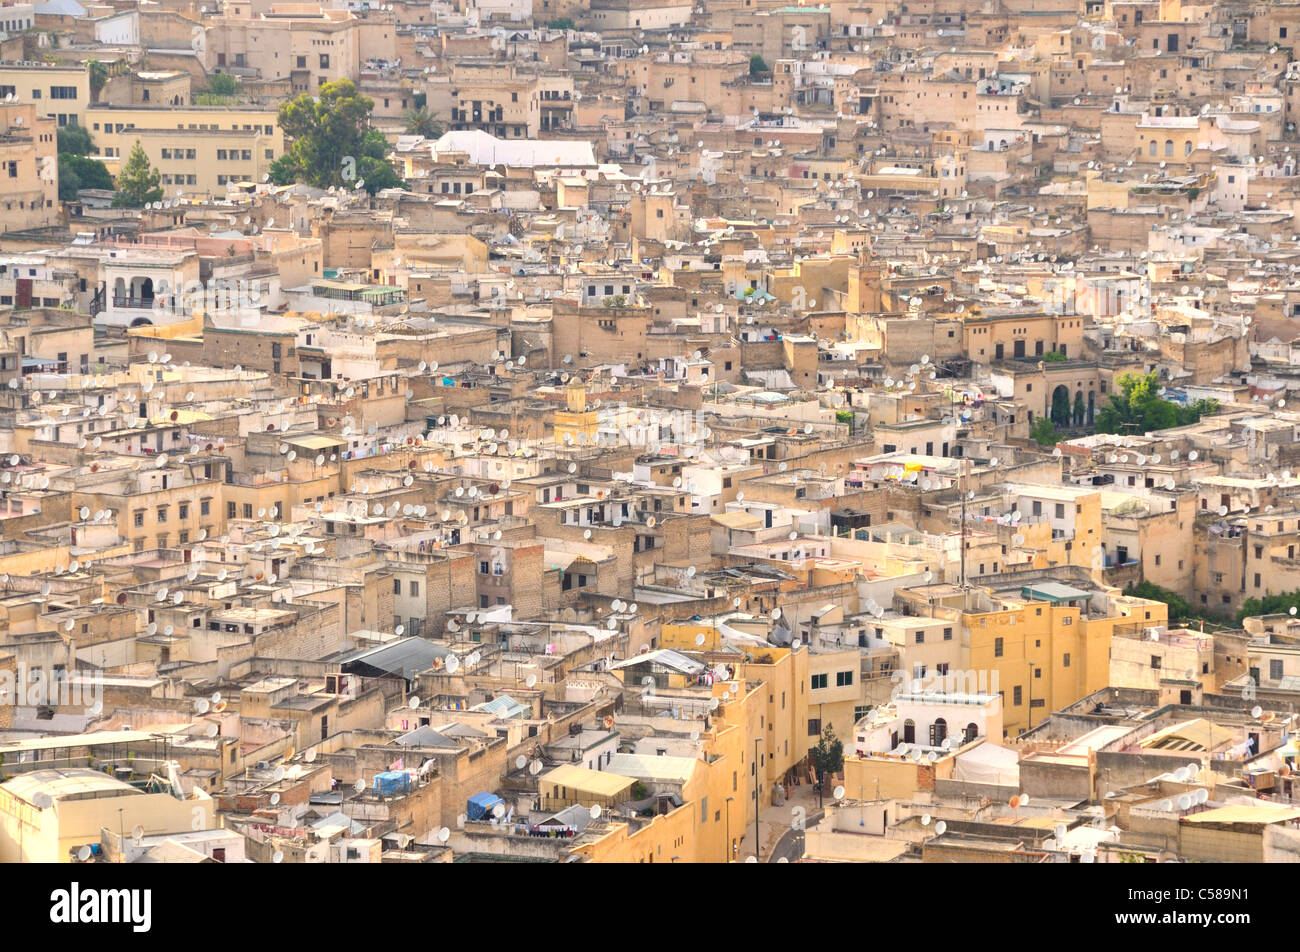 Africa, Morocco, Maghreb, North Africa, Fez, Old Town, roofs, Medina, overview Stock Photo